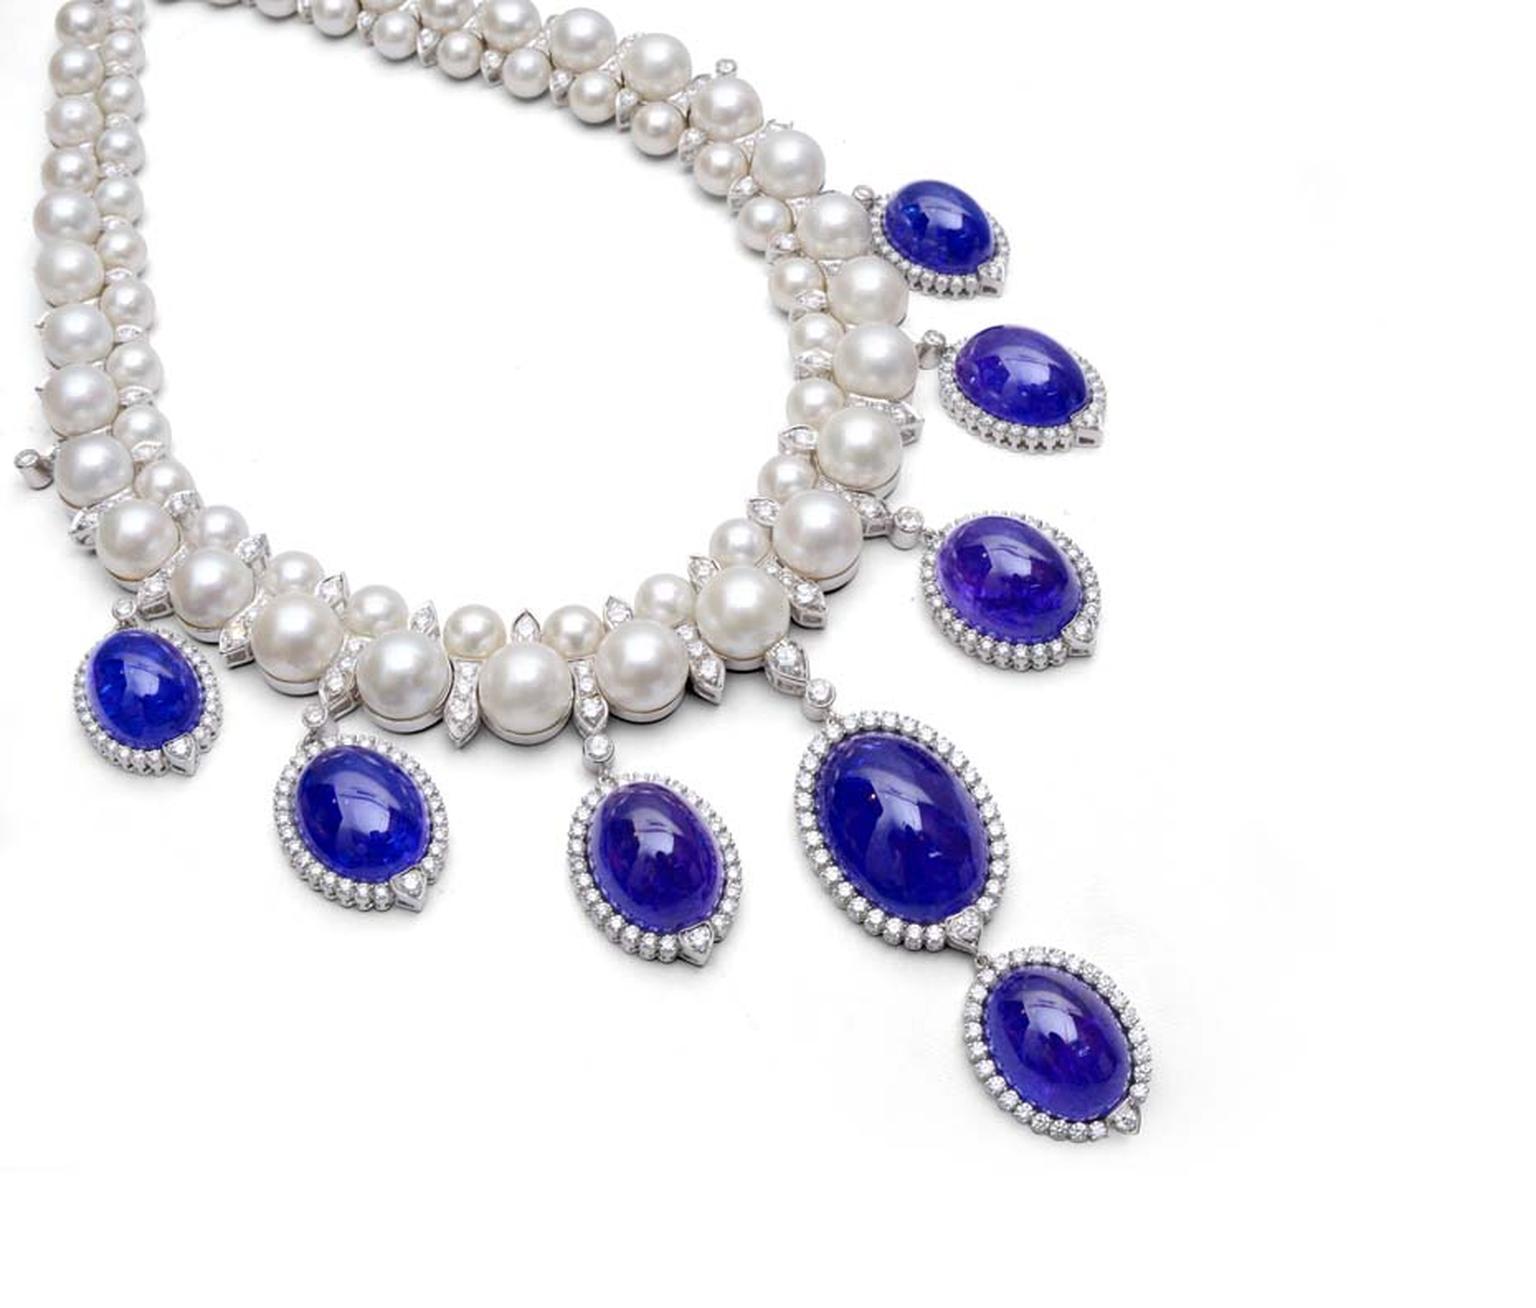 Farah Khan classic pearl and diamond necklace with cabochon tanzanite pendants.